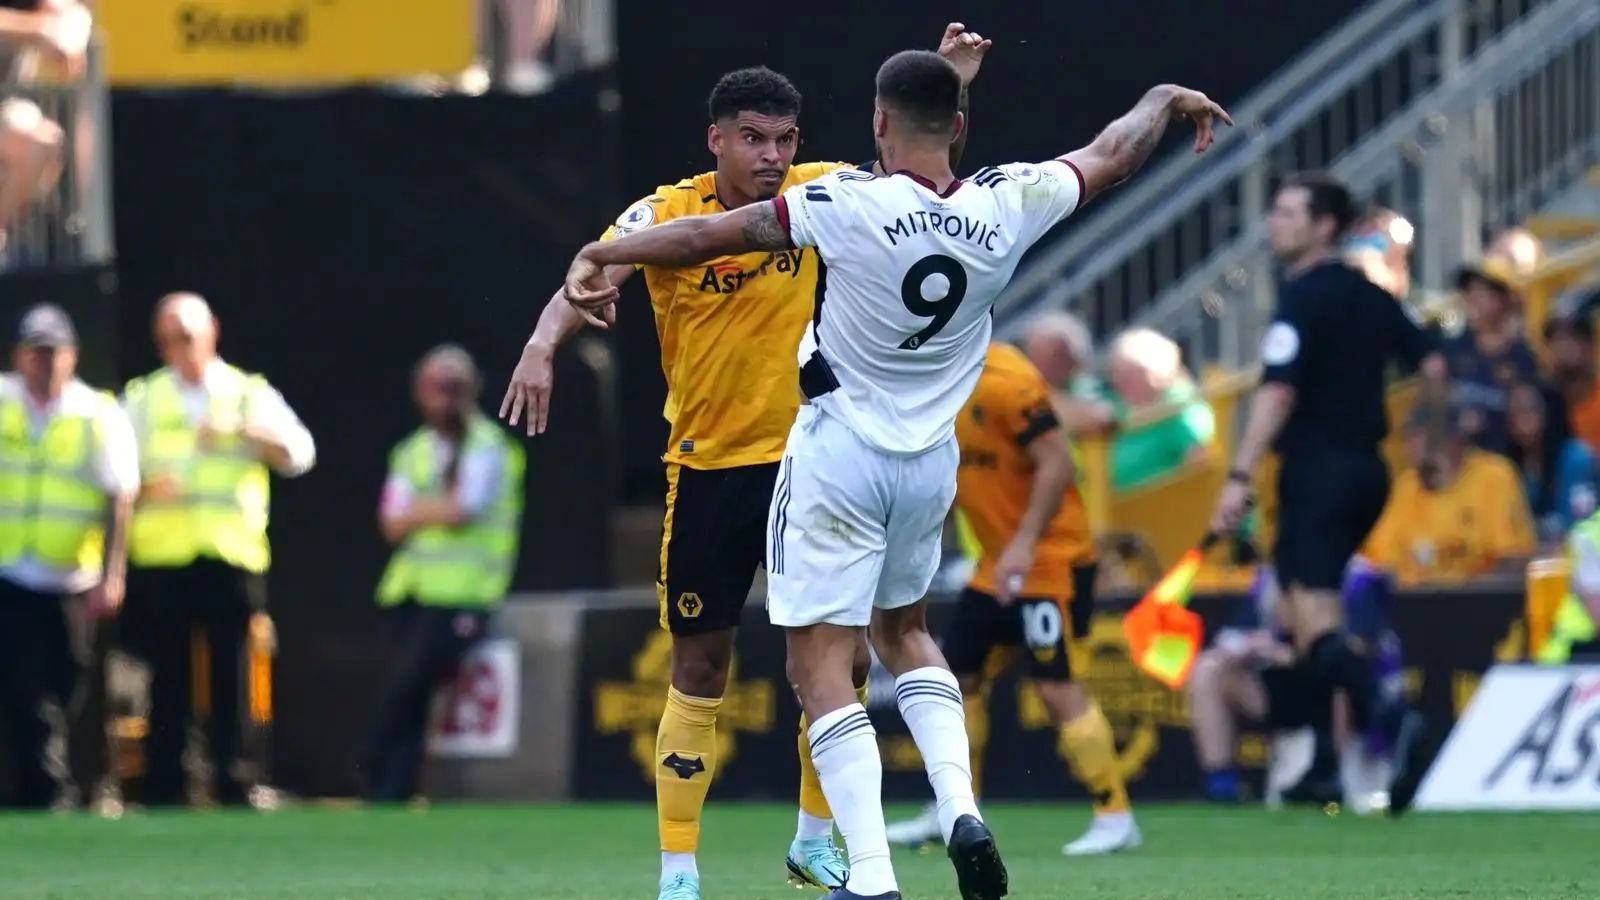 Wolves midfielder Morgan Gibbs-White and Fulham's Mitovic come to blows